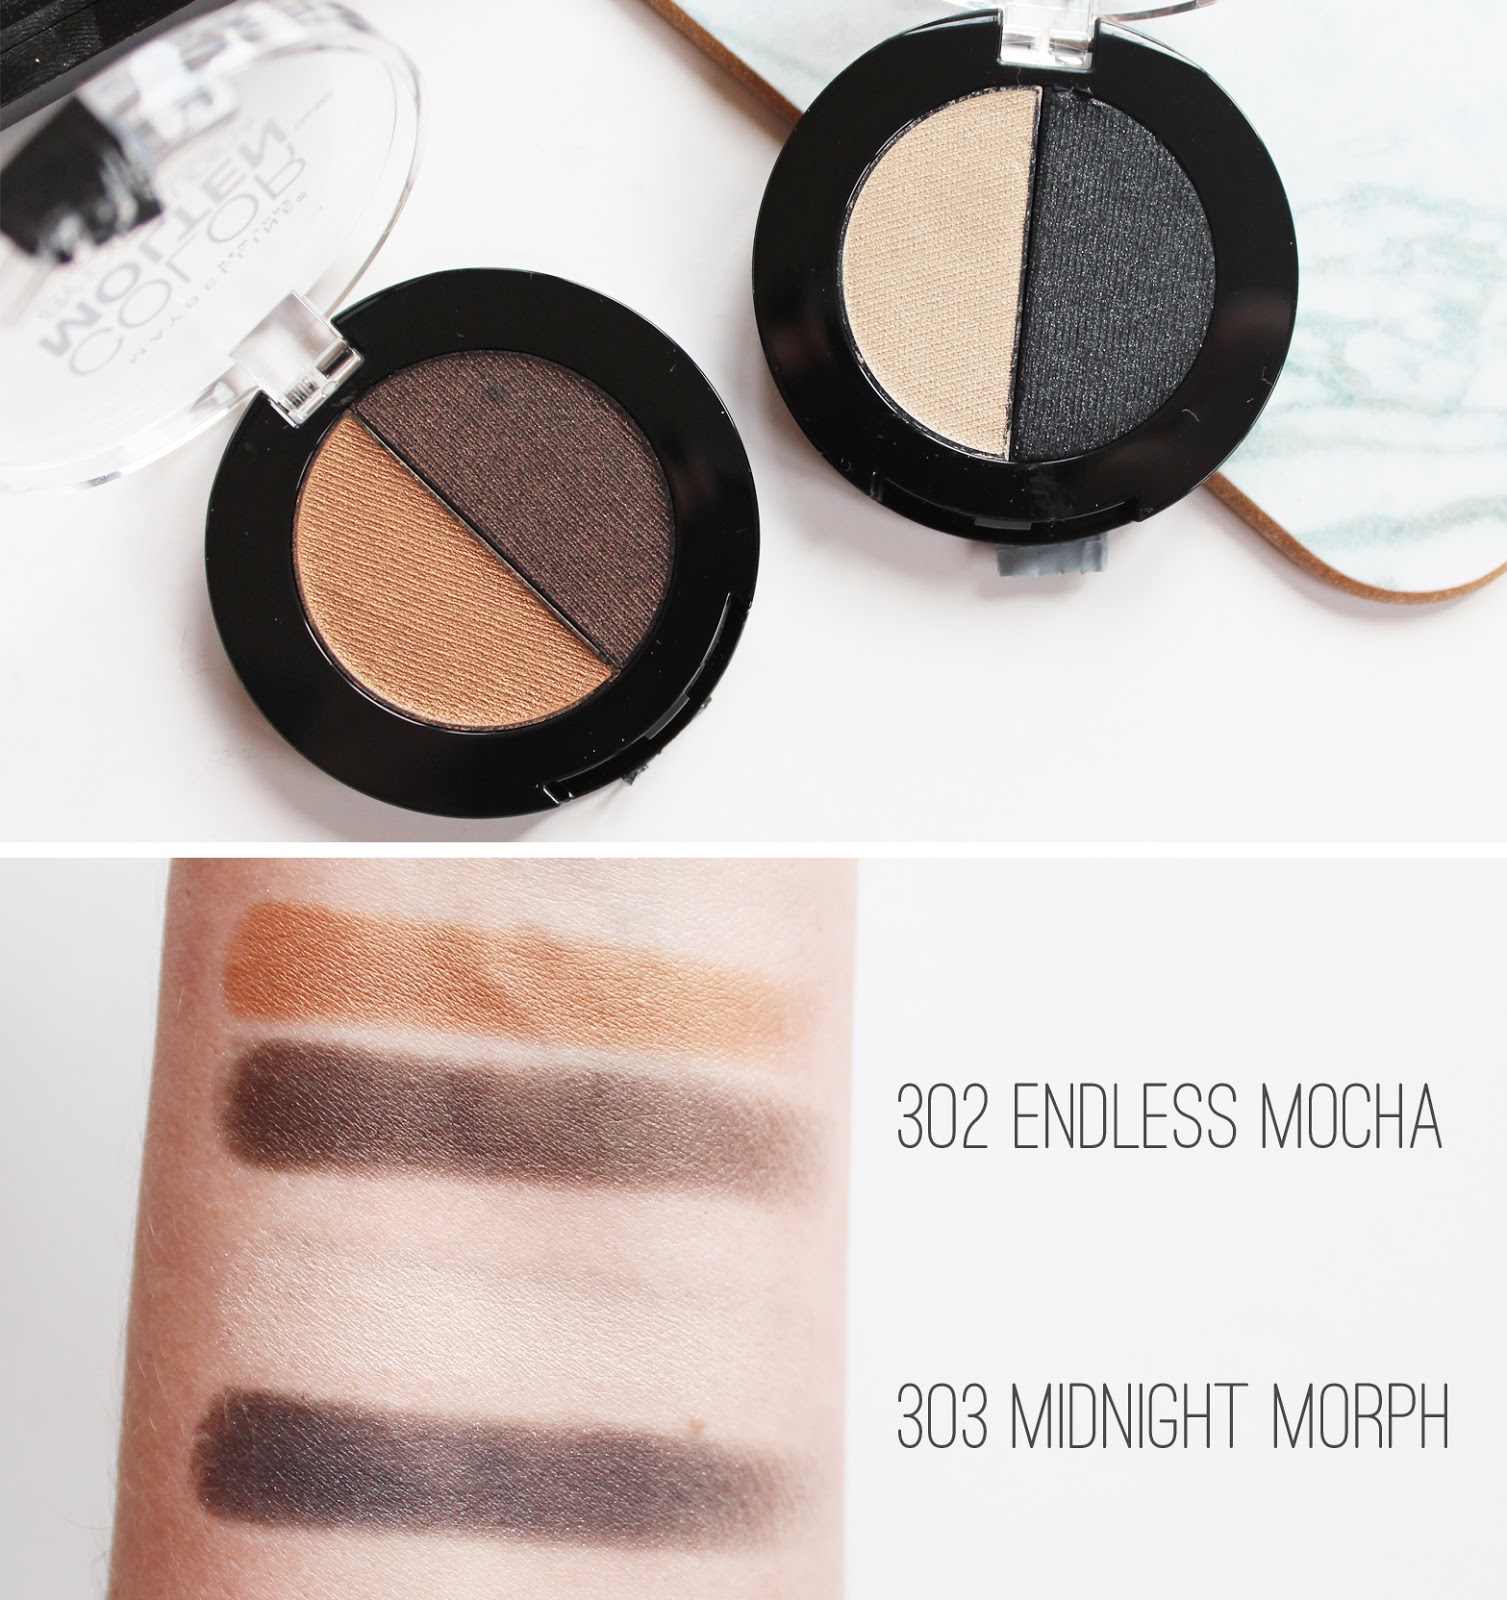 MAYBELLINE | New Releases to NZ - The Nudes Palette + Color Molten Duo Eyeshadows - CassandraMyee